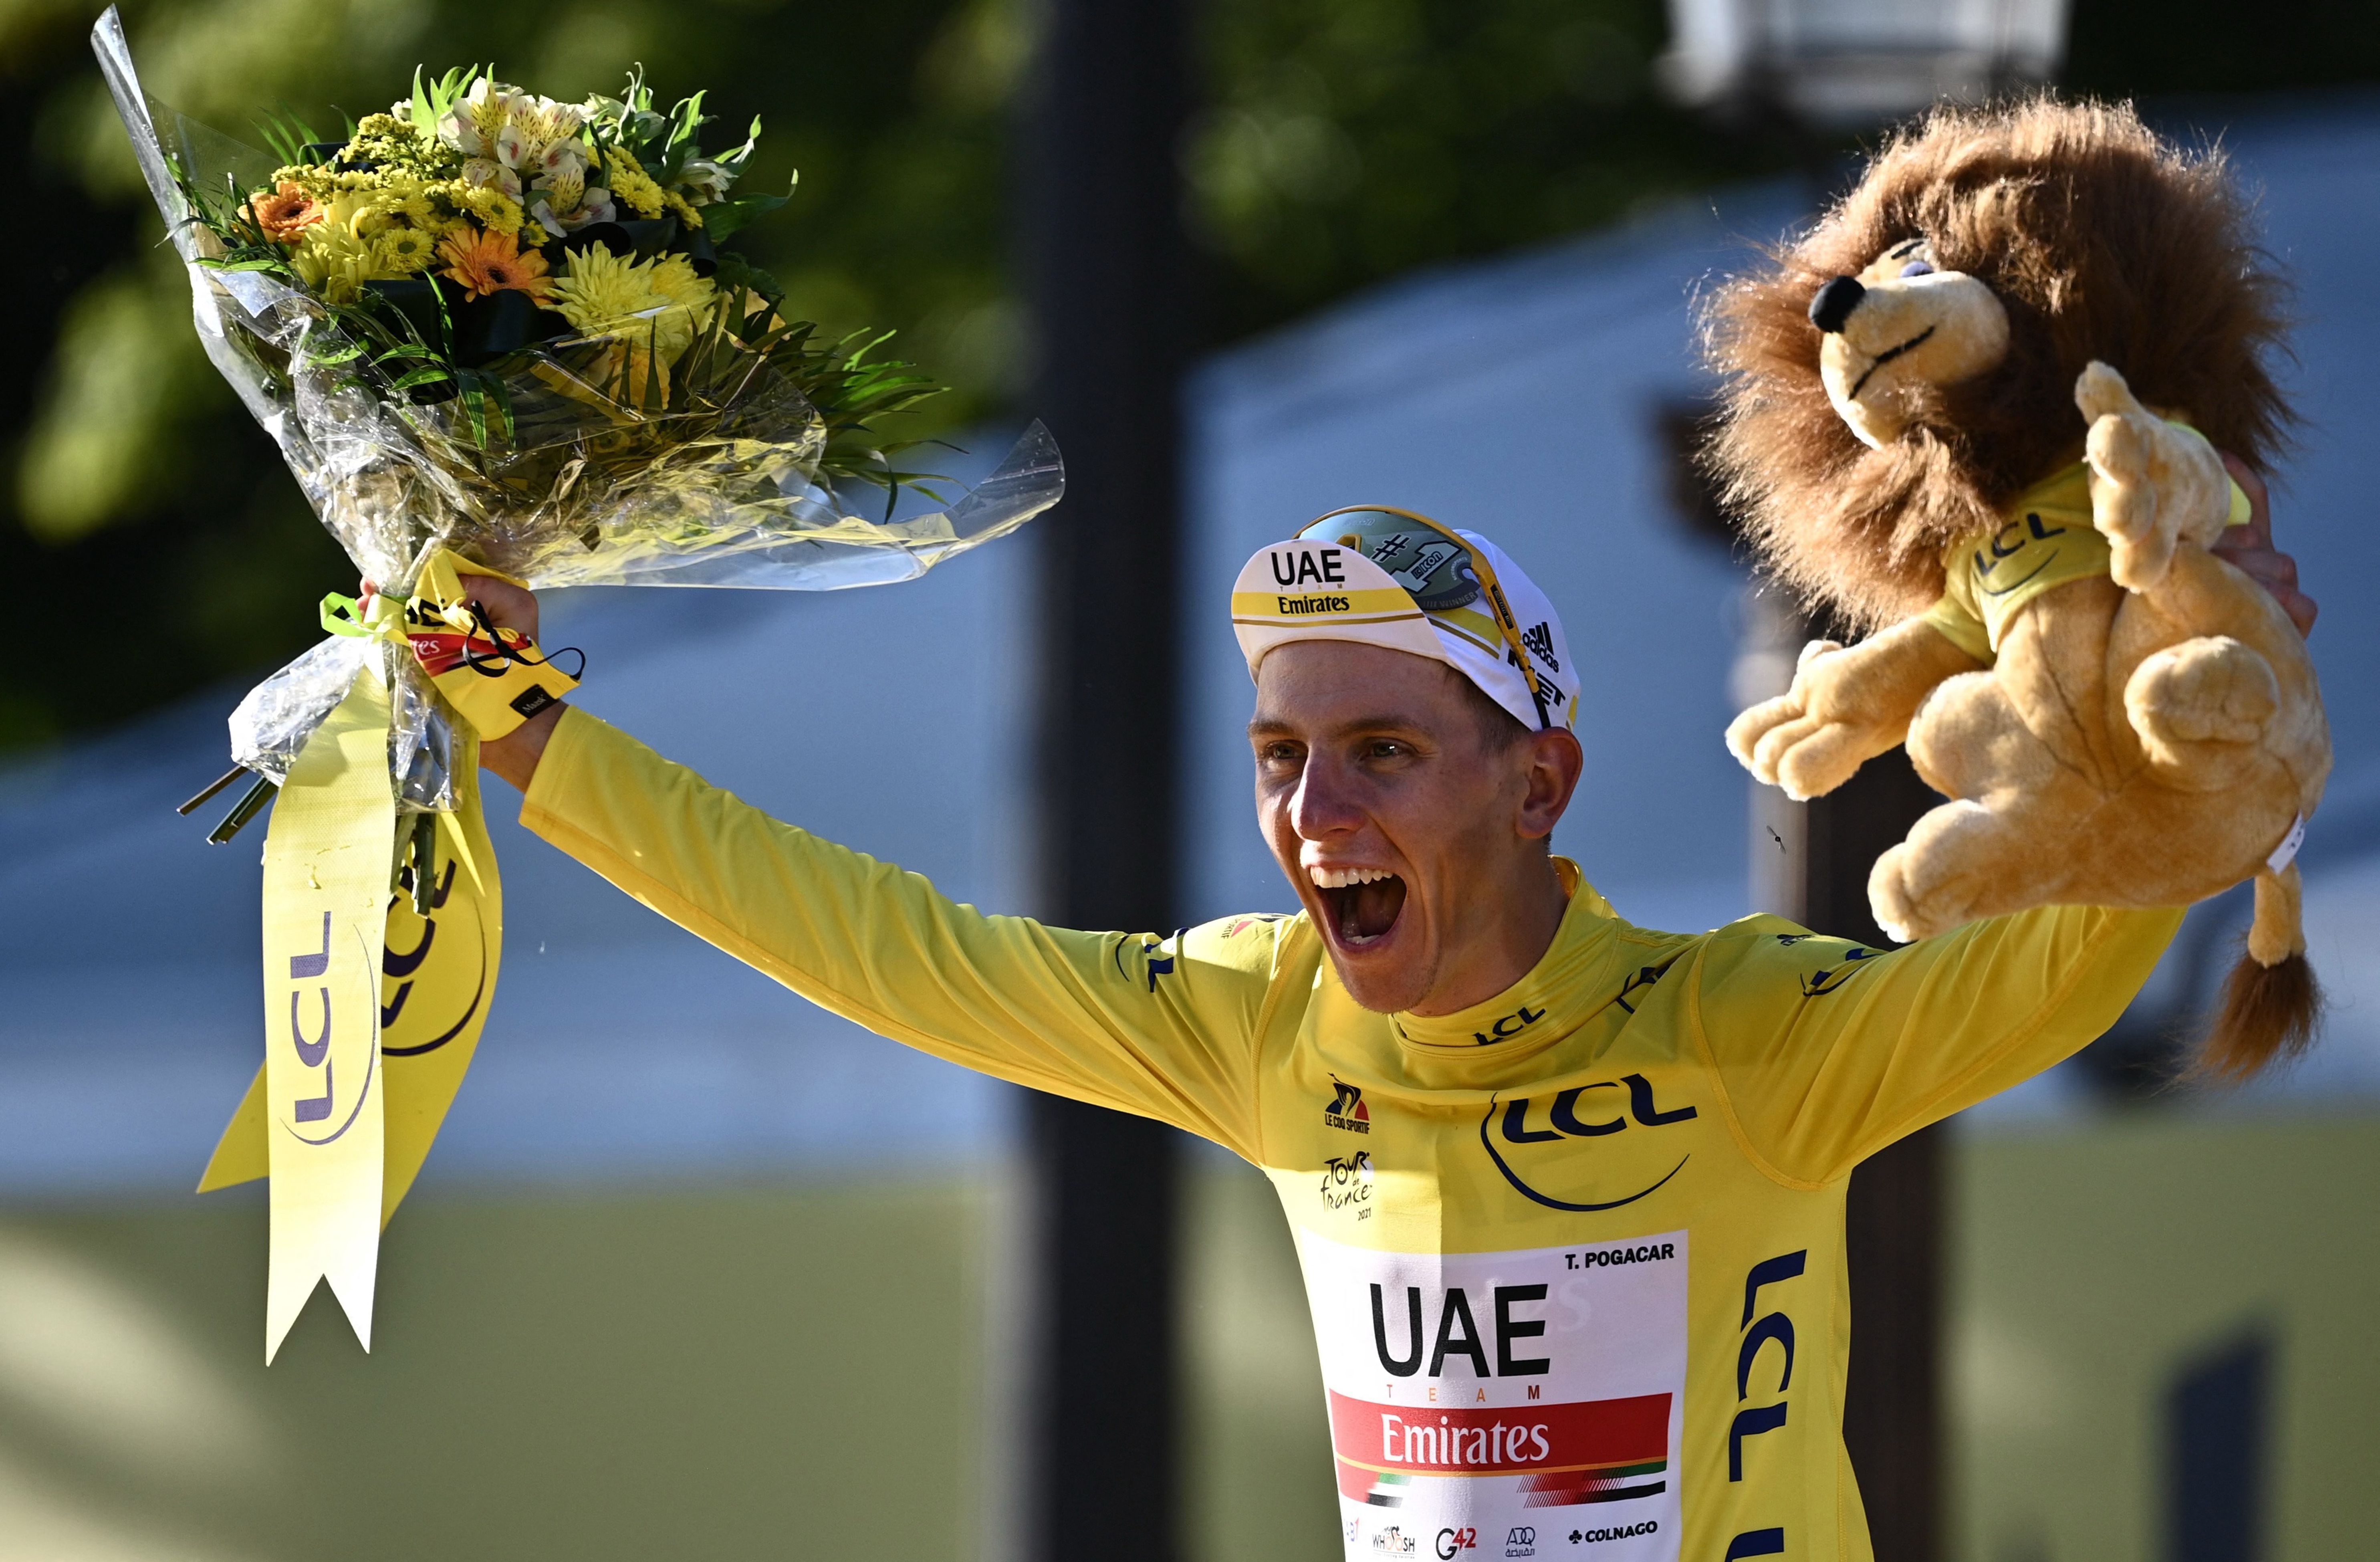 Who Won the 2021 Tour de France? de France Leaderboard and Rankings